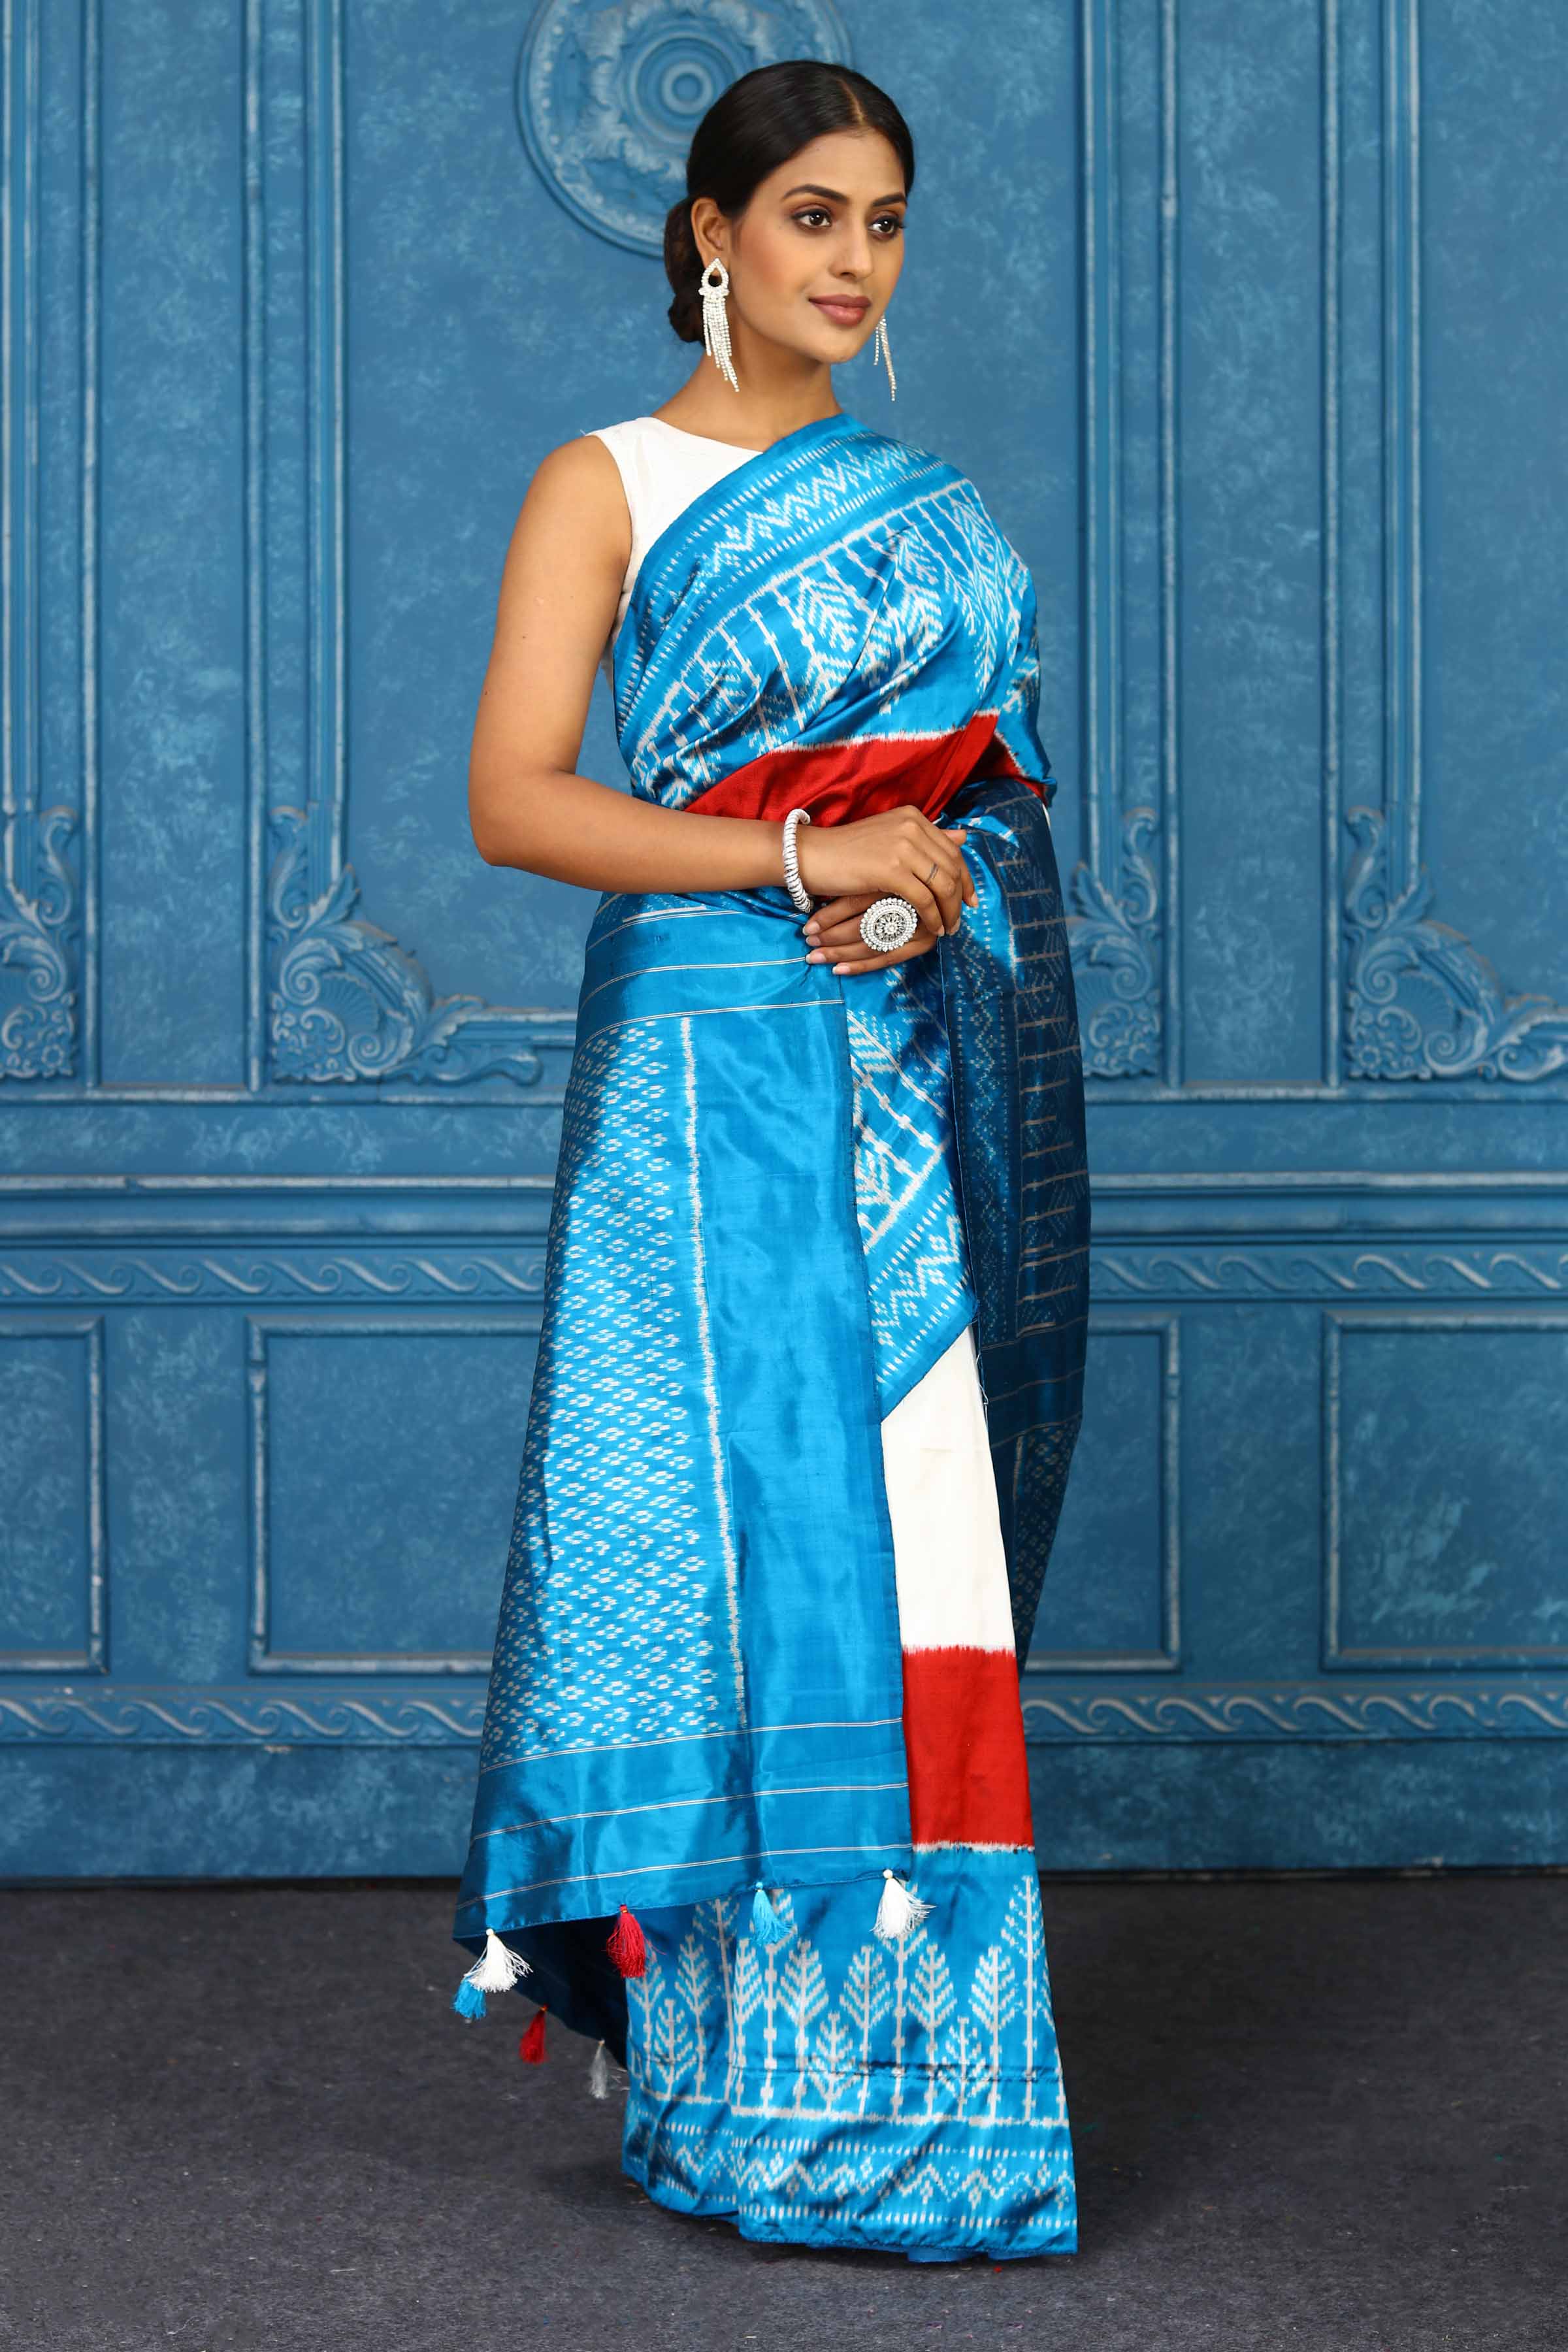 Buy cream and turquoise blue pochampally silk ikkat sari online in USA. Look your best on festive occasions in latest designer sarees, pure silk sarees, Kanchipuram sarees, handwoven sarees, tussar silk sarees, embroidered sarees from Pure Elegance Indian clothing store in USA.-side